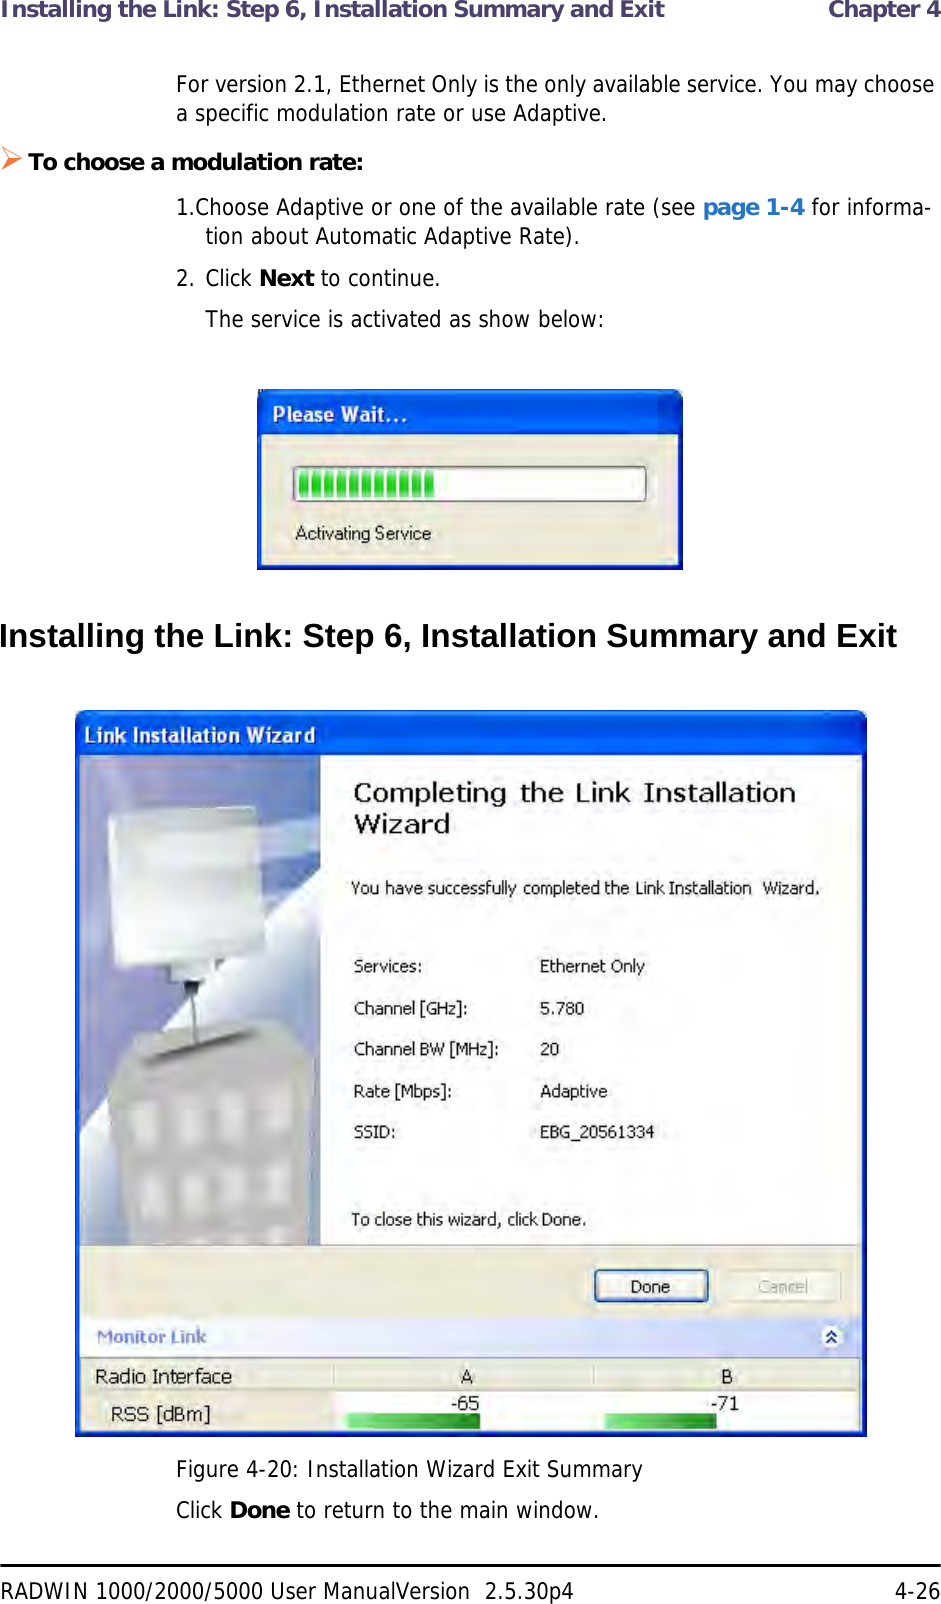 Installing the Link: Step 6, Installation Summary and Exit  Chapter 4RADWIN 1000/2000/5000 User ManualVersion  2.5.30p4 4-26For version 2.1, Ethernet Only is the only available service. You may choose a specific modulation rate or use Adaptive.To choose a modulation rate:1.Choose Adaptive or one of the available rate (see page 1-4 for informa-tion about Automatic Adaptive Rate).2. Click Next to continue.The service is activated as show below:Installing the Link: Step 6, Installation Summary and ExitFigure 4-20: Installation Wizard Exit Summary Click Done to return to the main window.